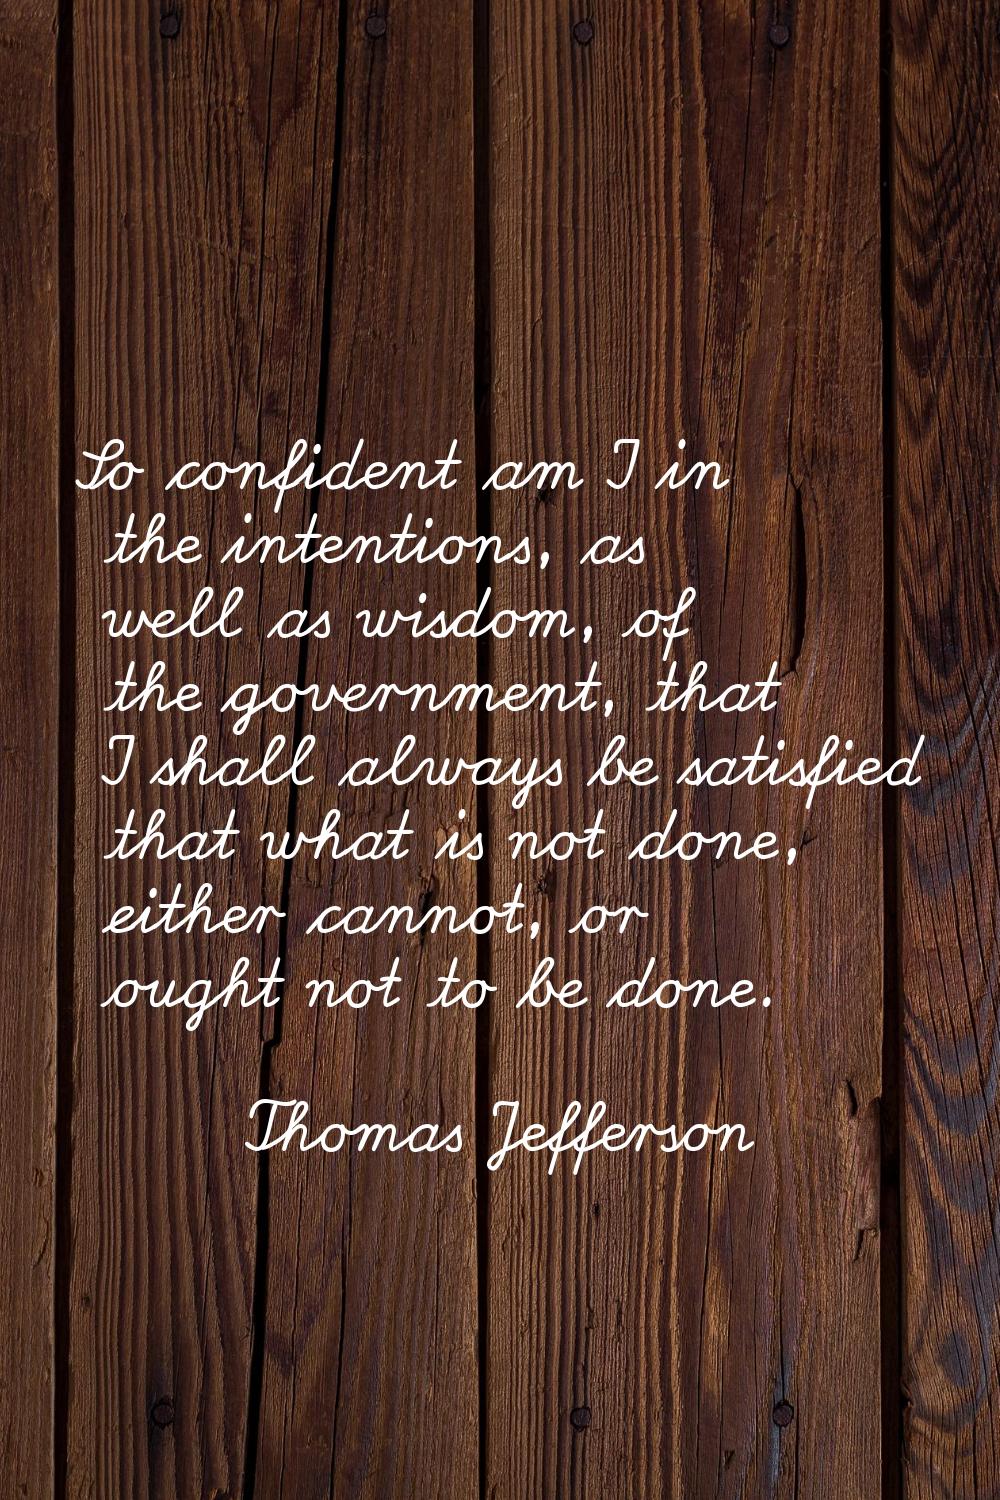 So confident am I in the intentions, as well as wisdom, of the government, that I shall always be s